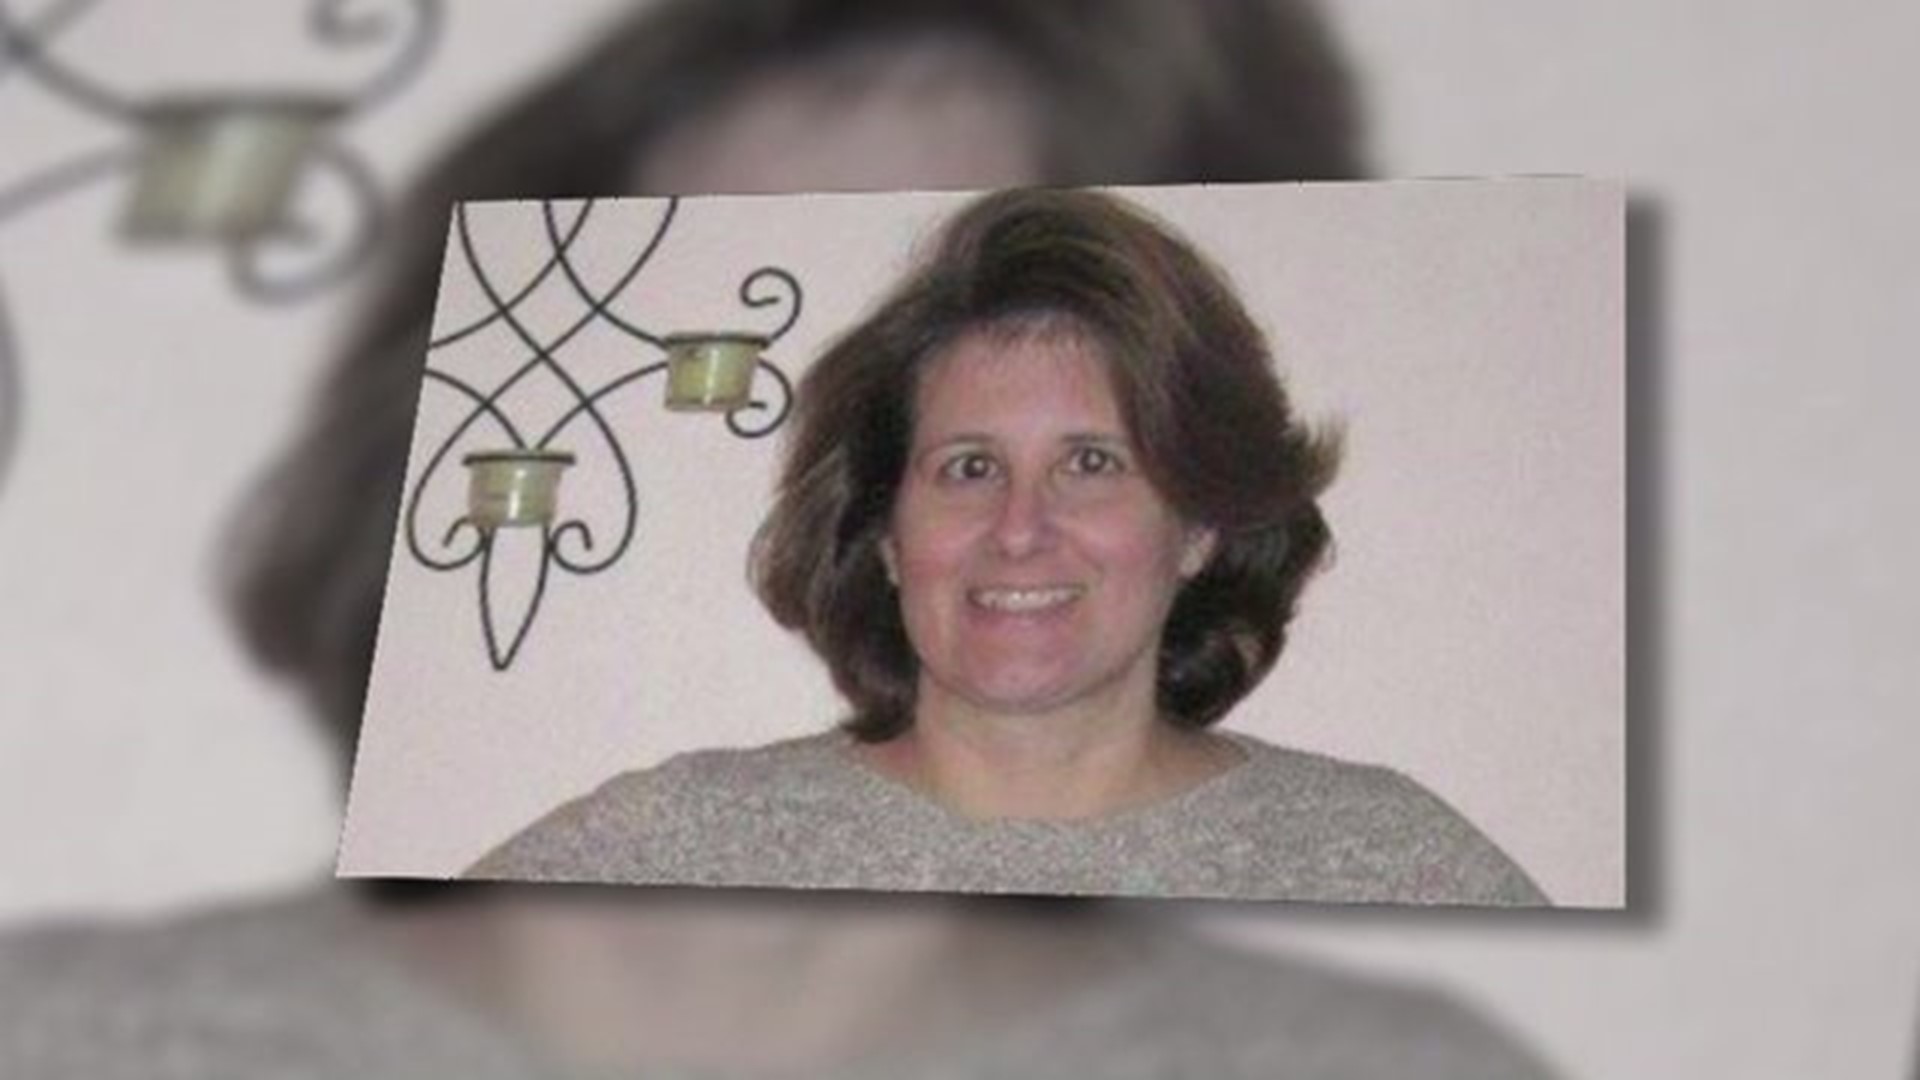 Police still searching for missing hospital worker